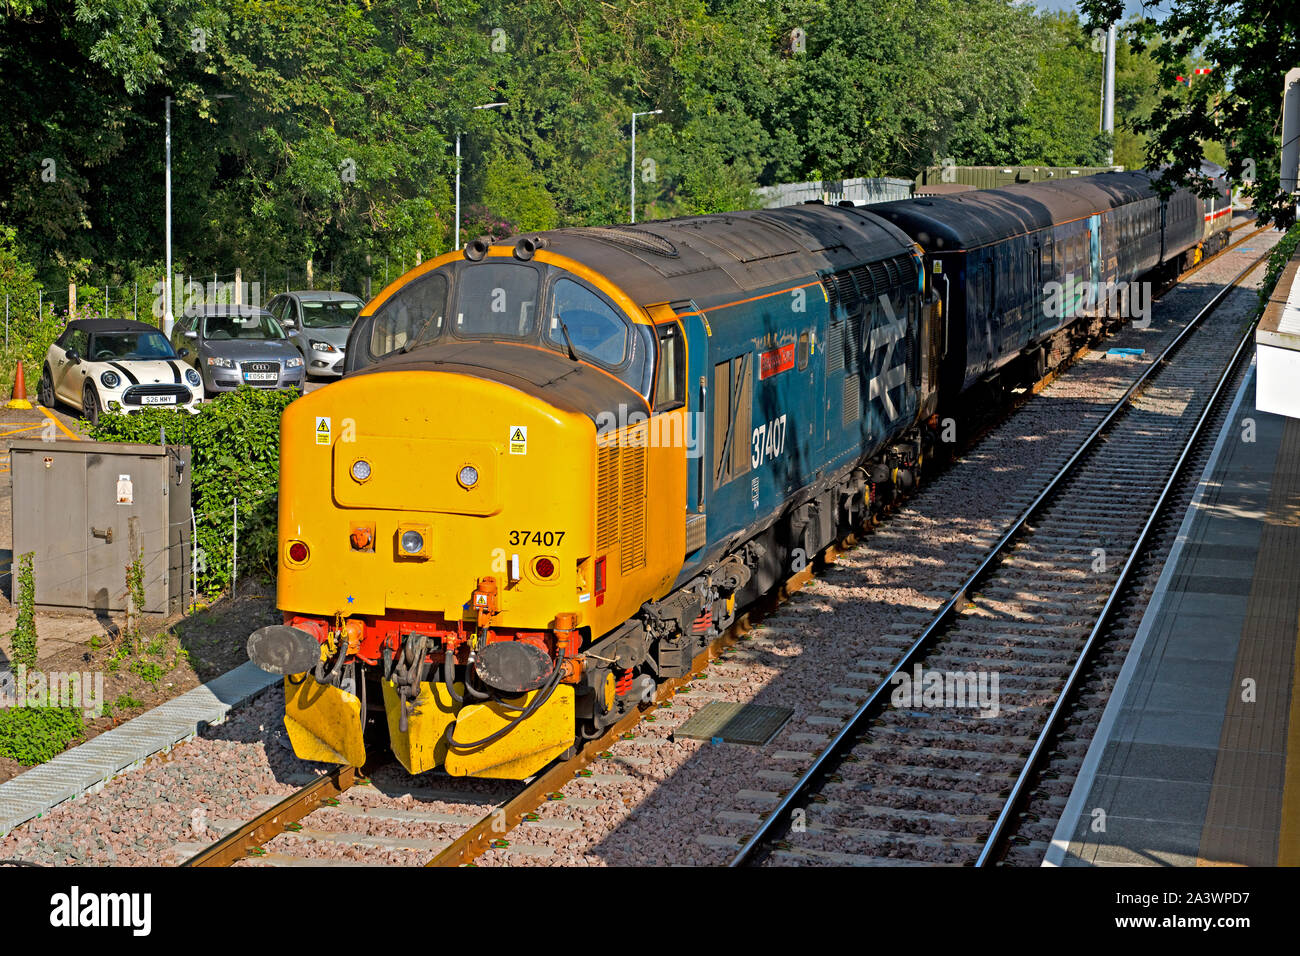 British Railways class 37 diesel locomotive no 37407 approaches Brundall with a passenger train from Lowestoft on the Wherry Lines in Norfolk, UK Stock Photo